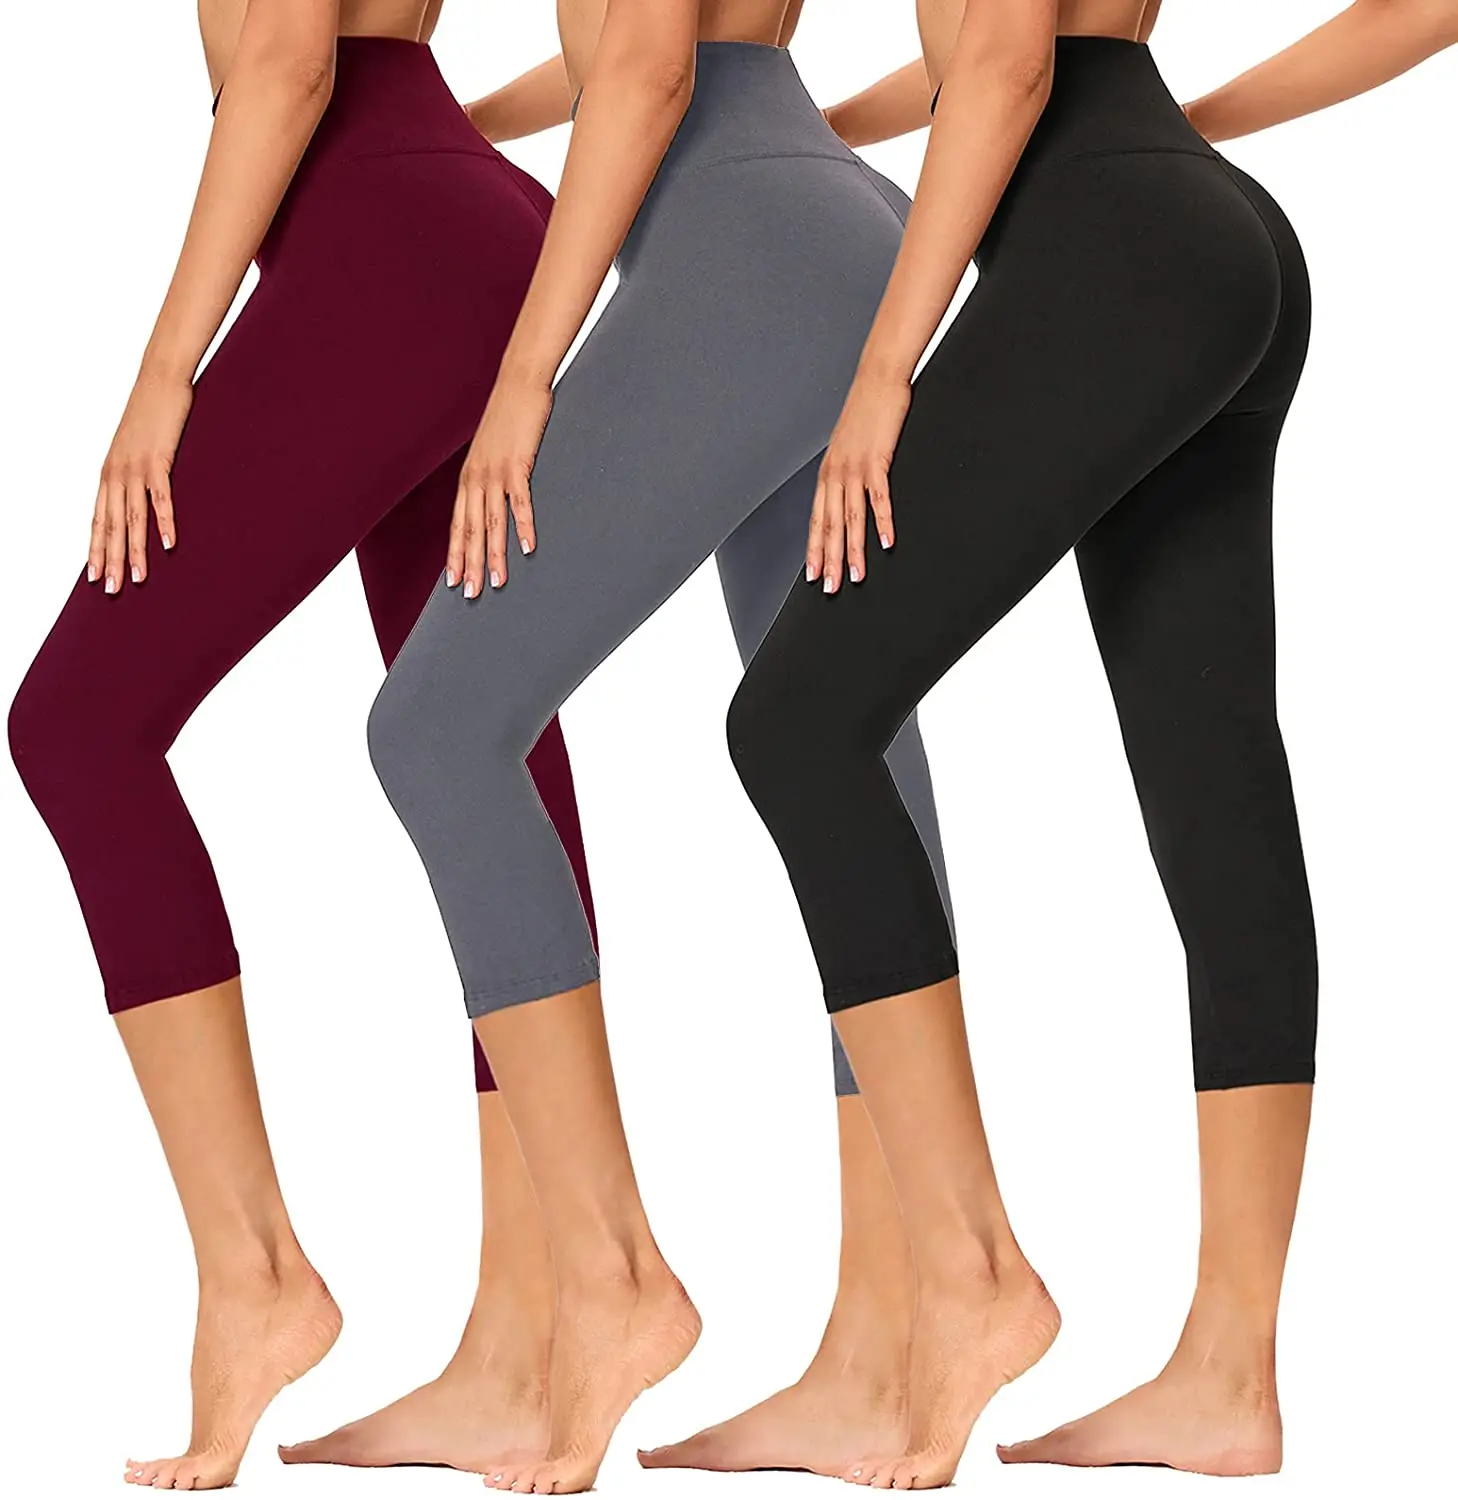 Buttery Soft Capri Leggings For Women High Waisted Capri Pants With Pockets  - Buy Buttery Soft Capri,Capri For Women,High Waisted Capri Pants With  Pockets Product on Alibaba.com